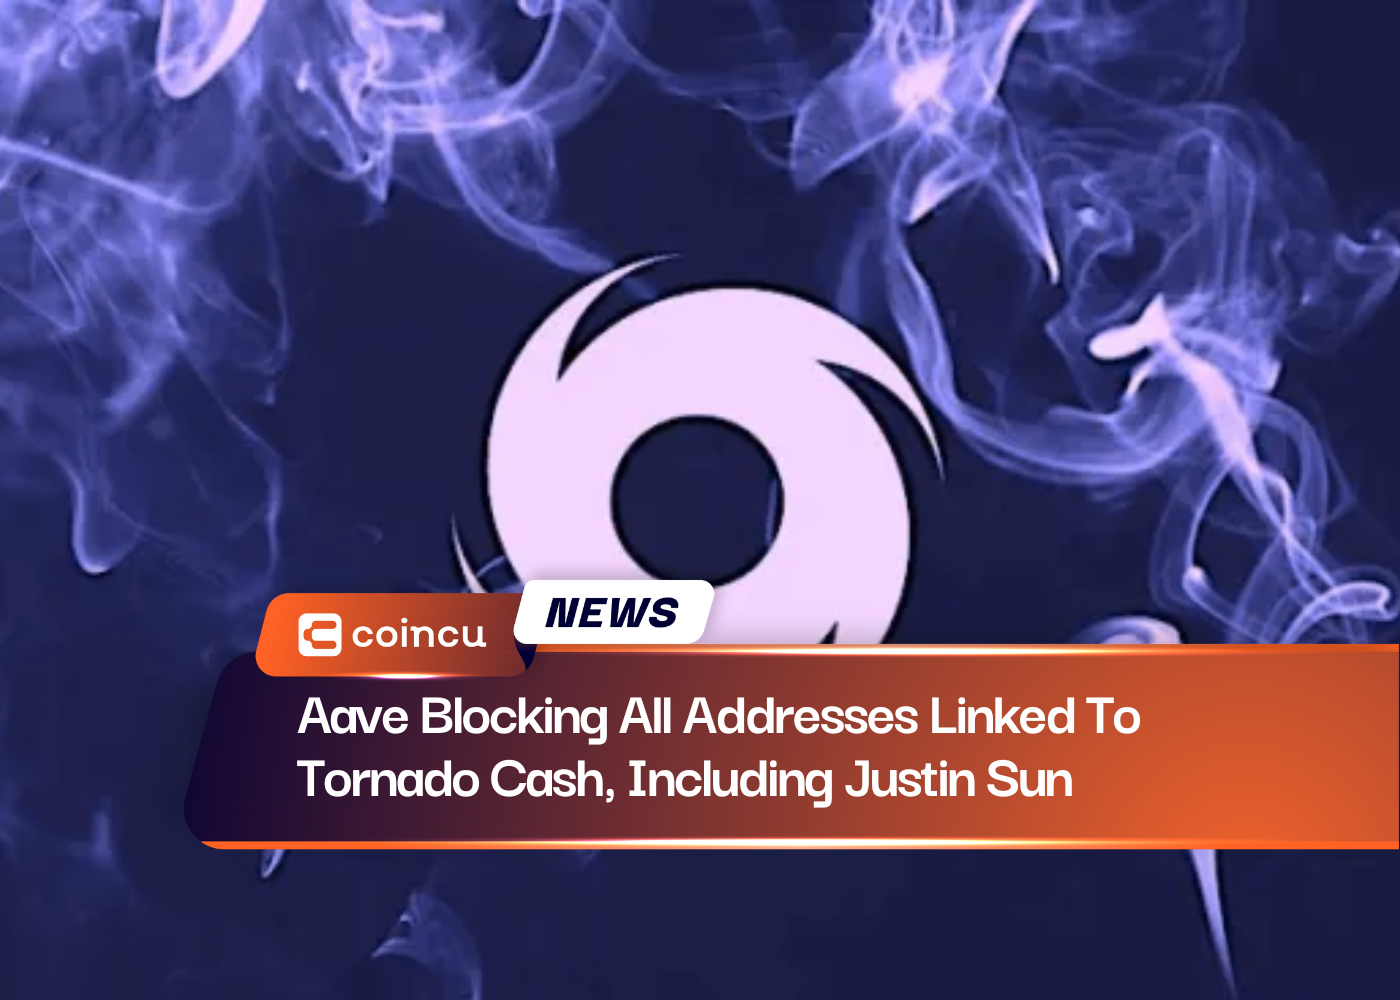 Aave Blocking All Addresses Linked To Tornado Cash, Including Justin Sun